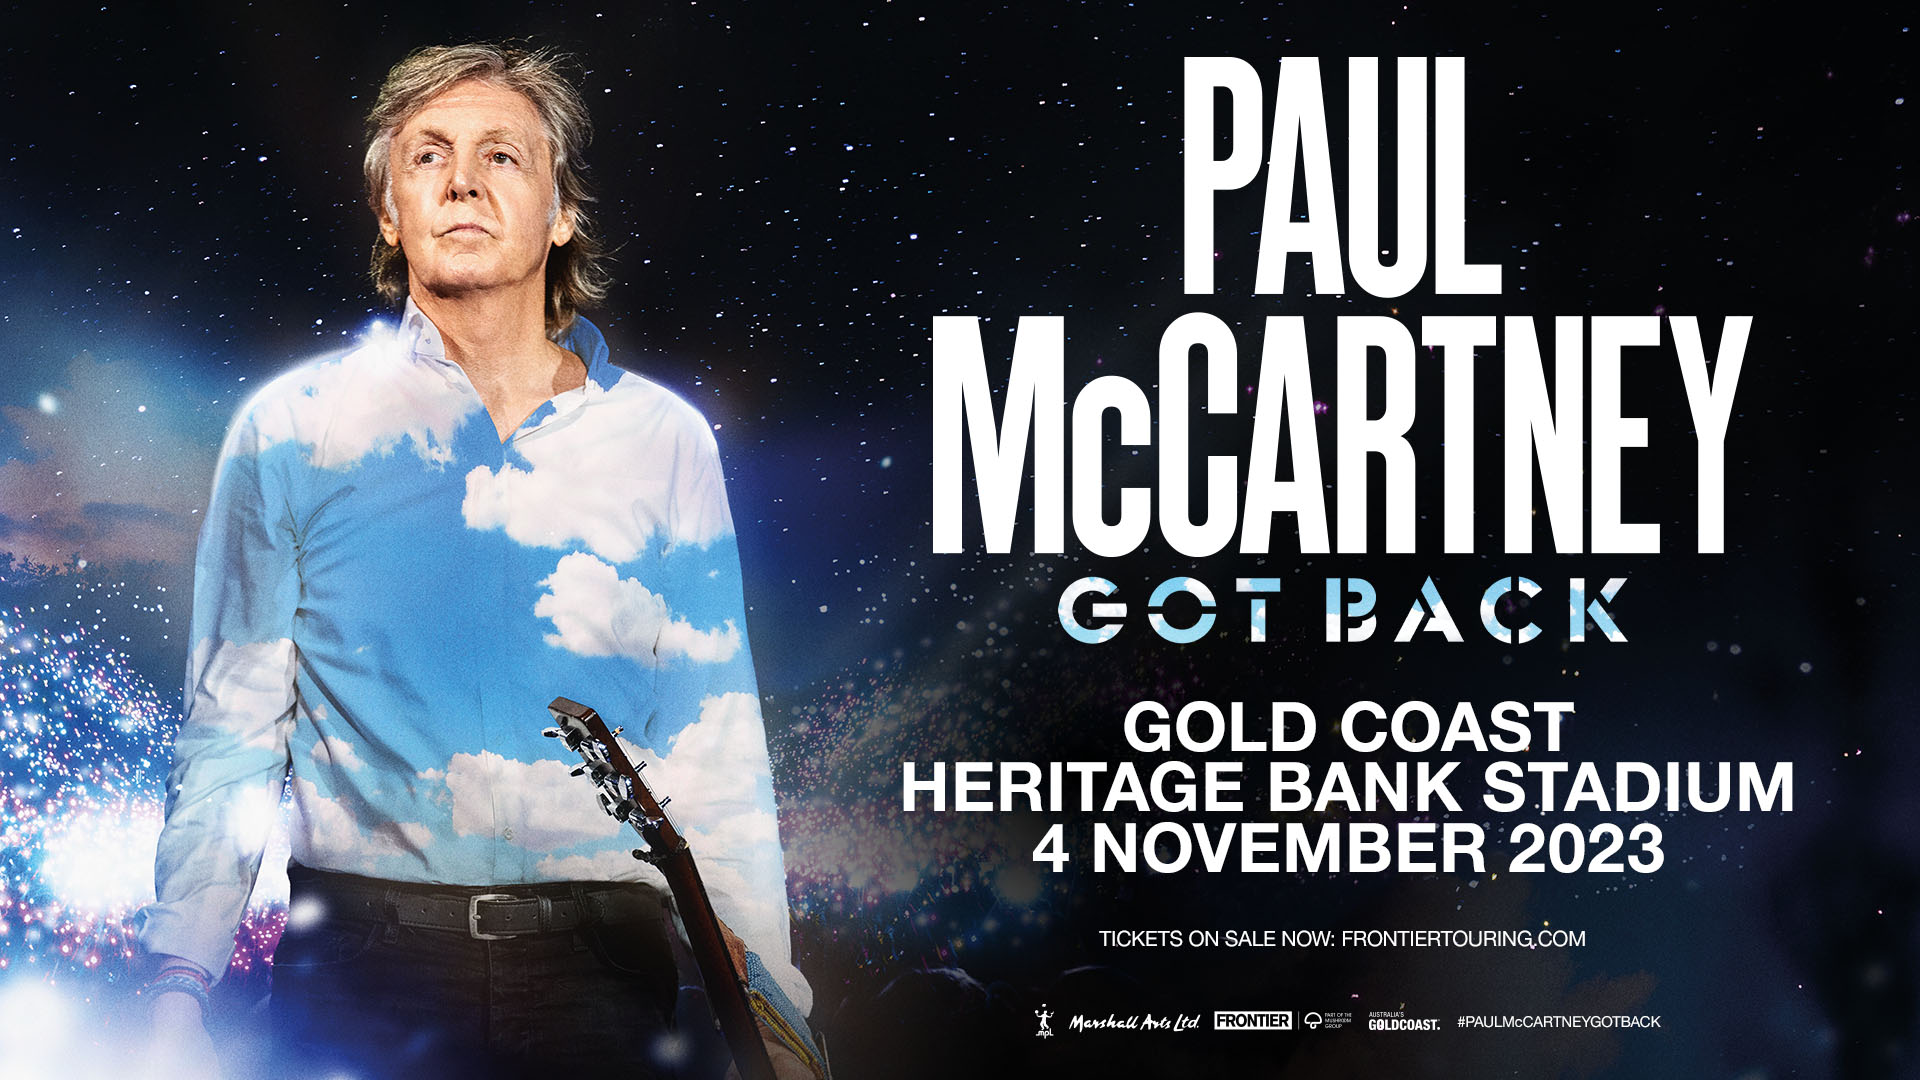 The Gold Coast gets ready to welcome music icon Paul McCartney